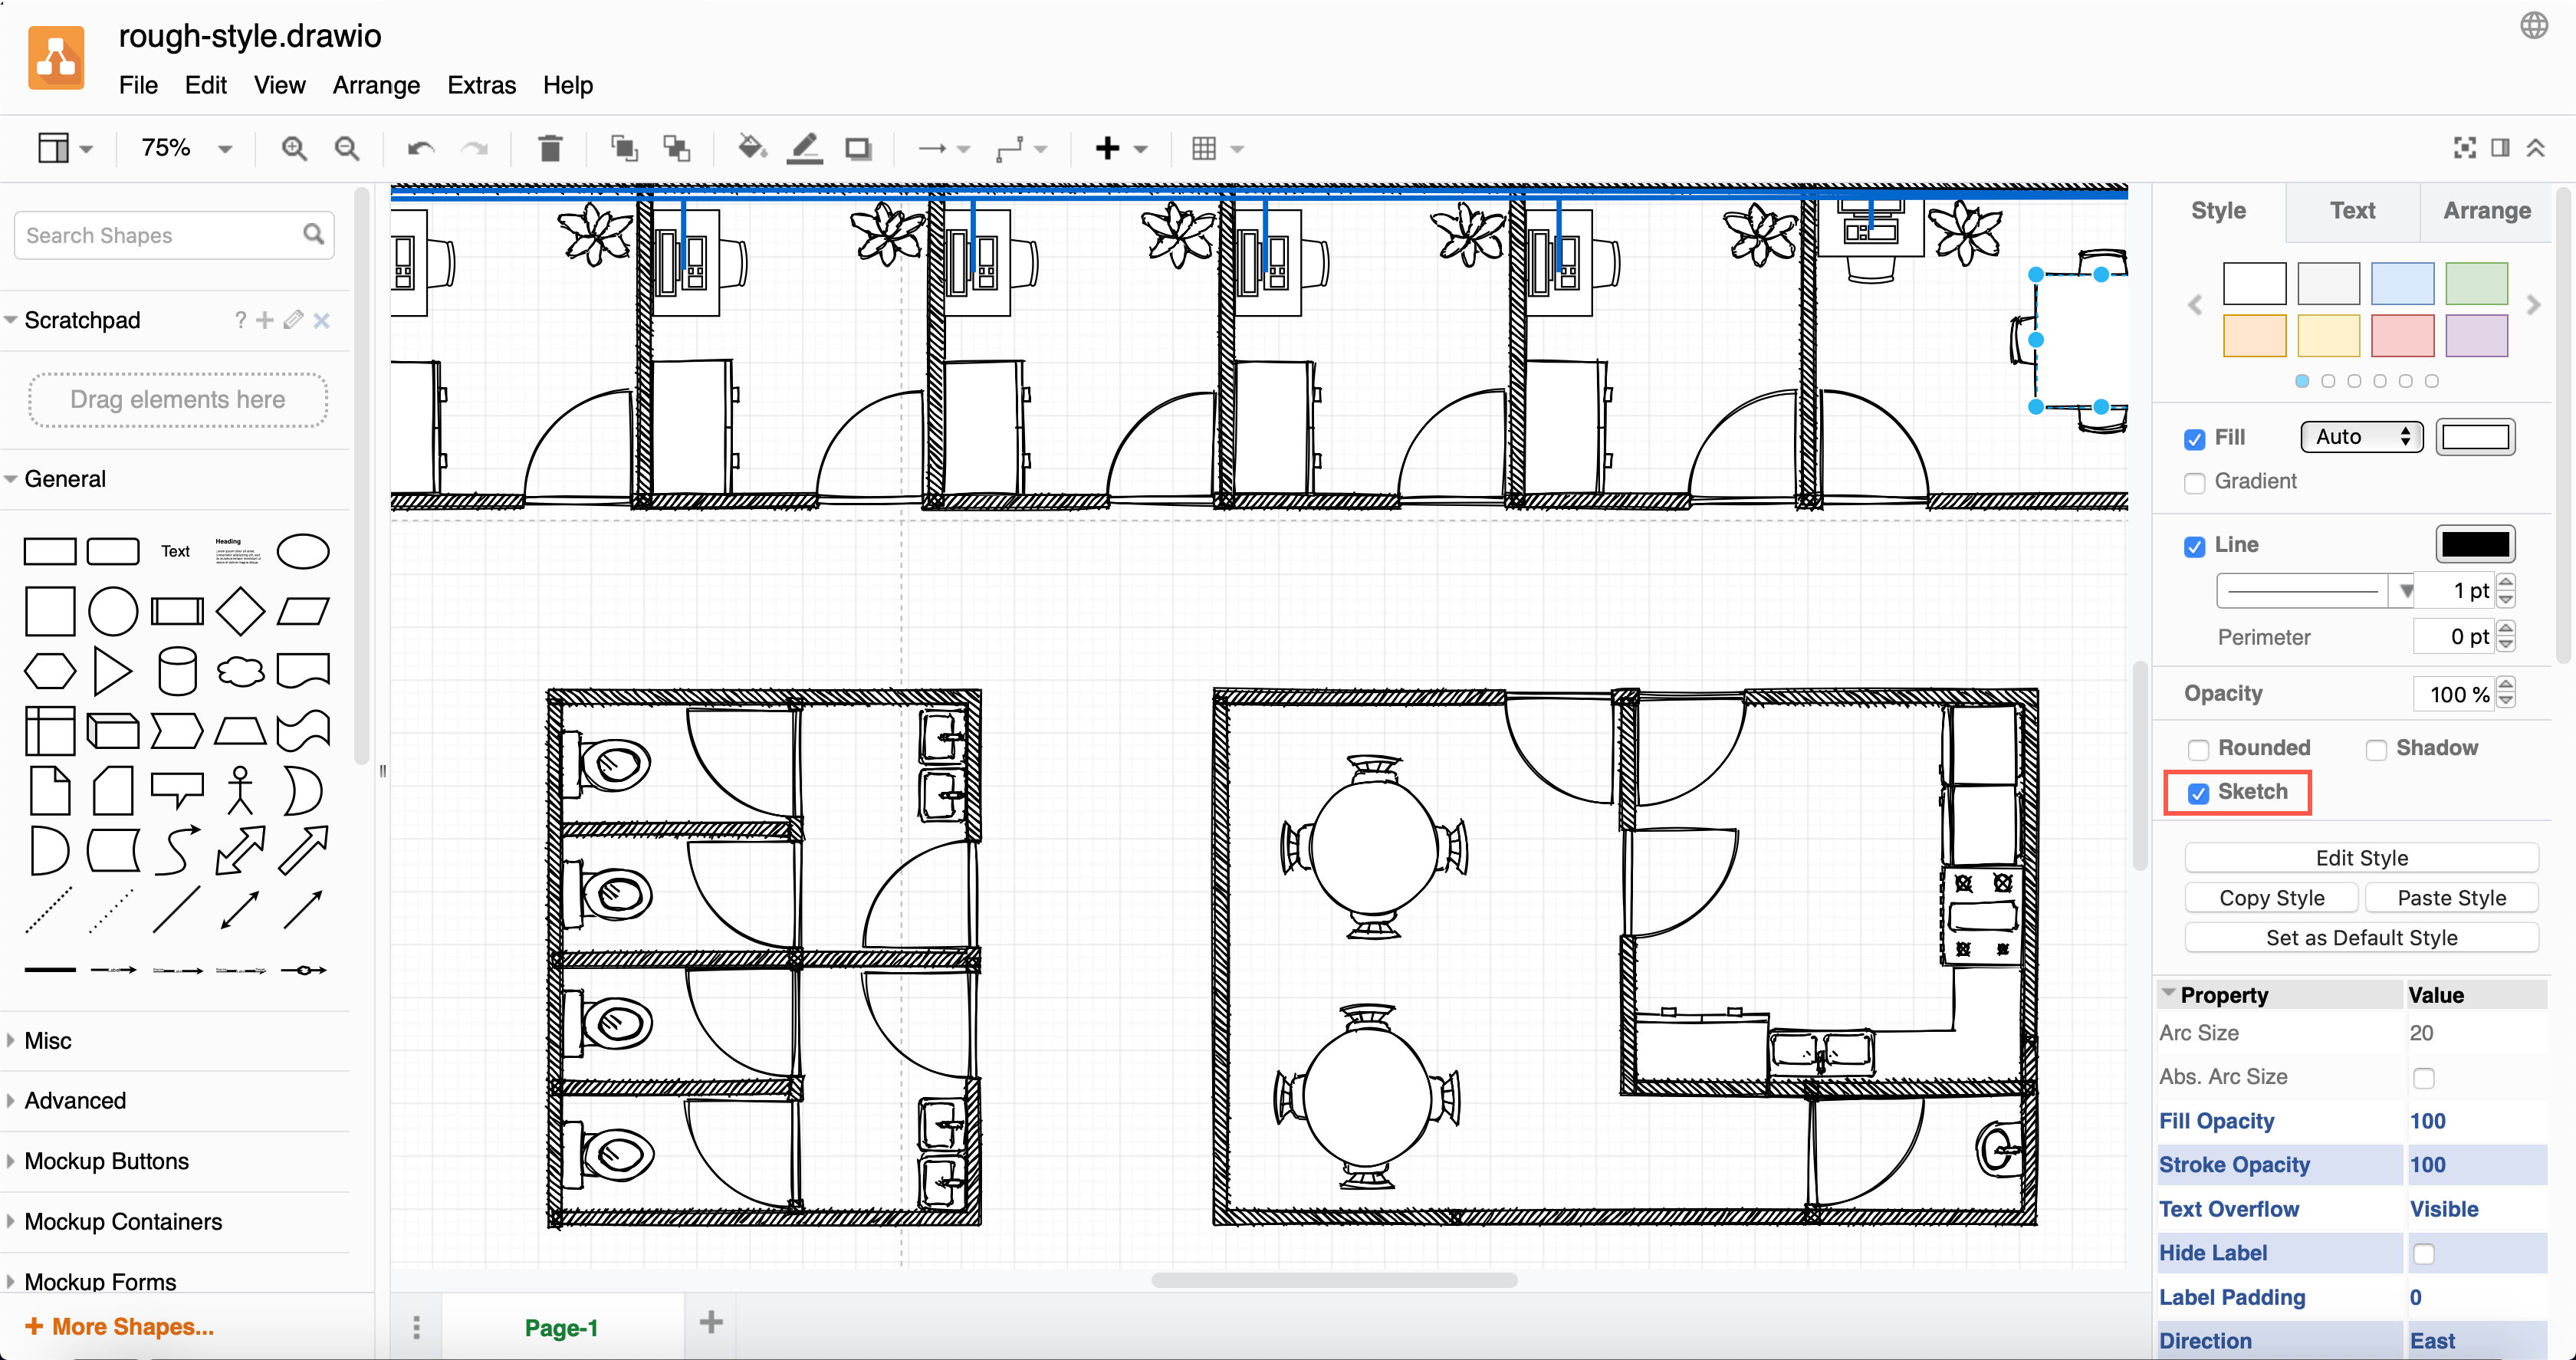 Select shapes, click Sketch in the format panel, and save your diagram to make it more informal